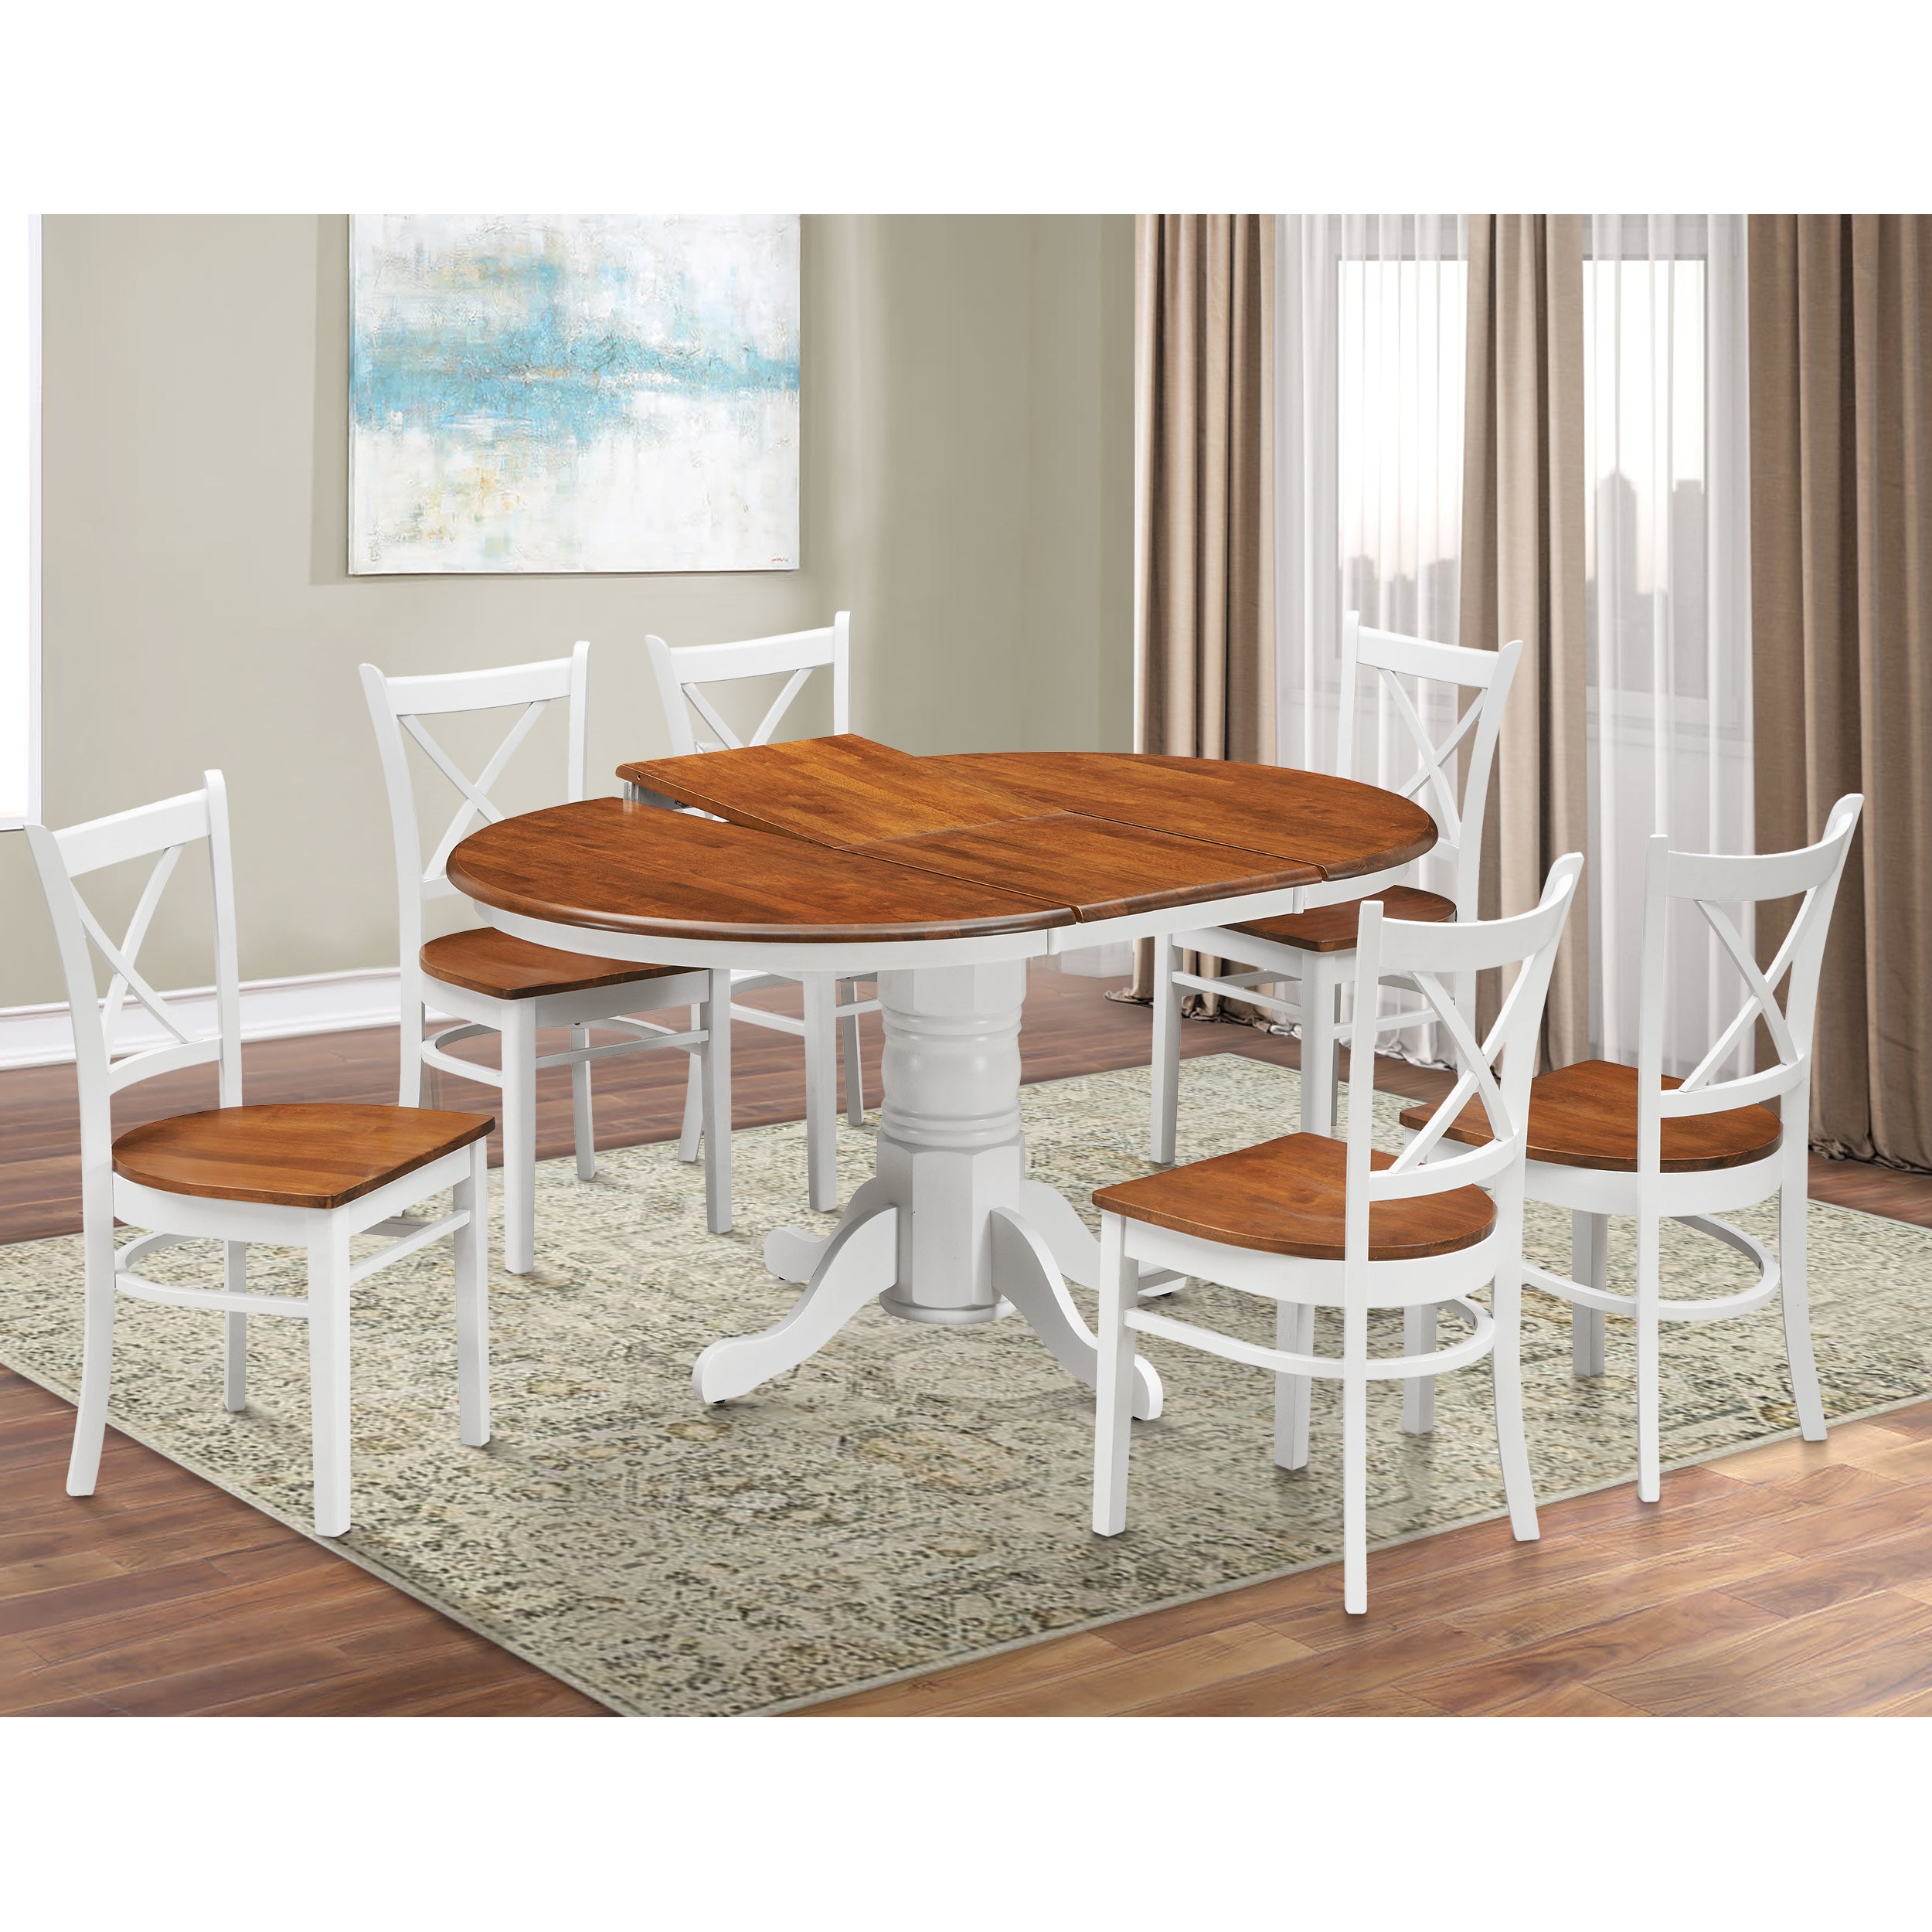 Lupin Dining Chair Set of 6 Crossback Solid Rubber Wood Furniture - White Oak Deals499